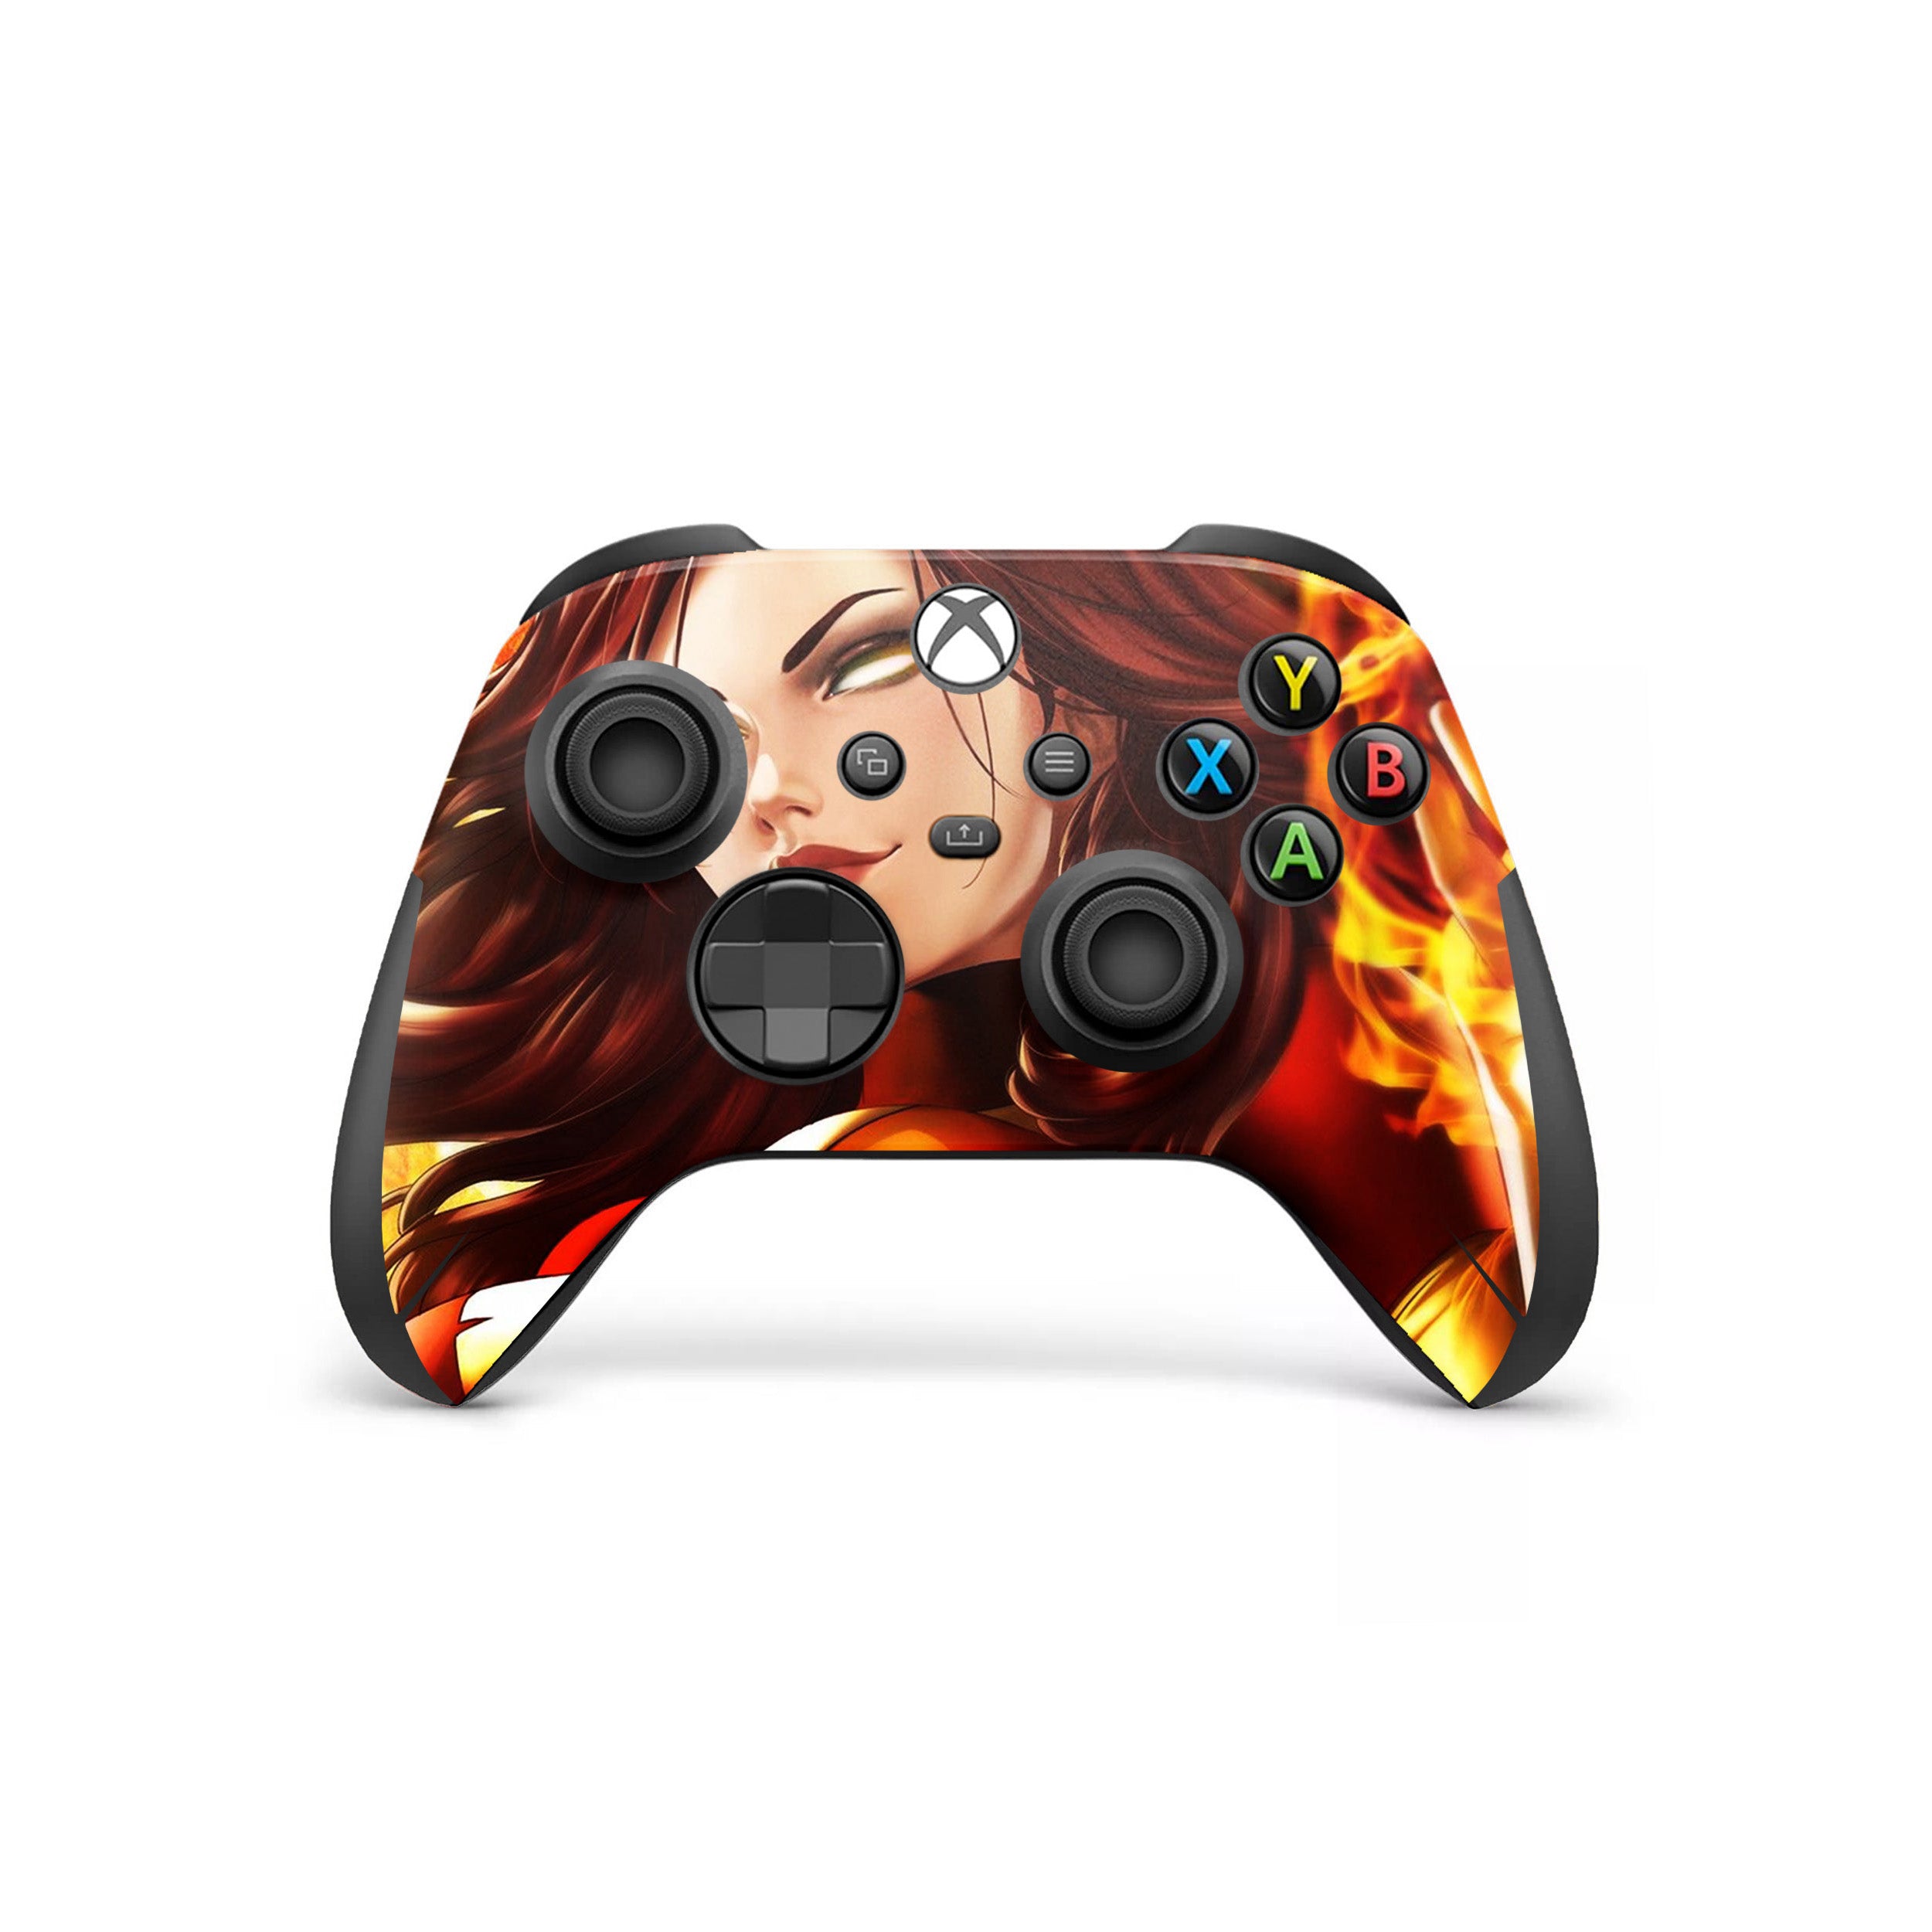 A video game skin featuring a Marvel X Men Phoenix design for the Xbox Wireless Controller.